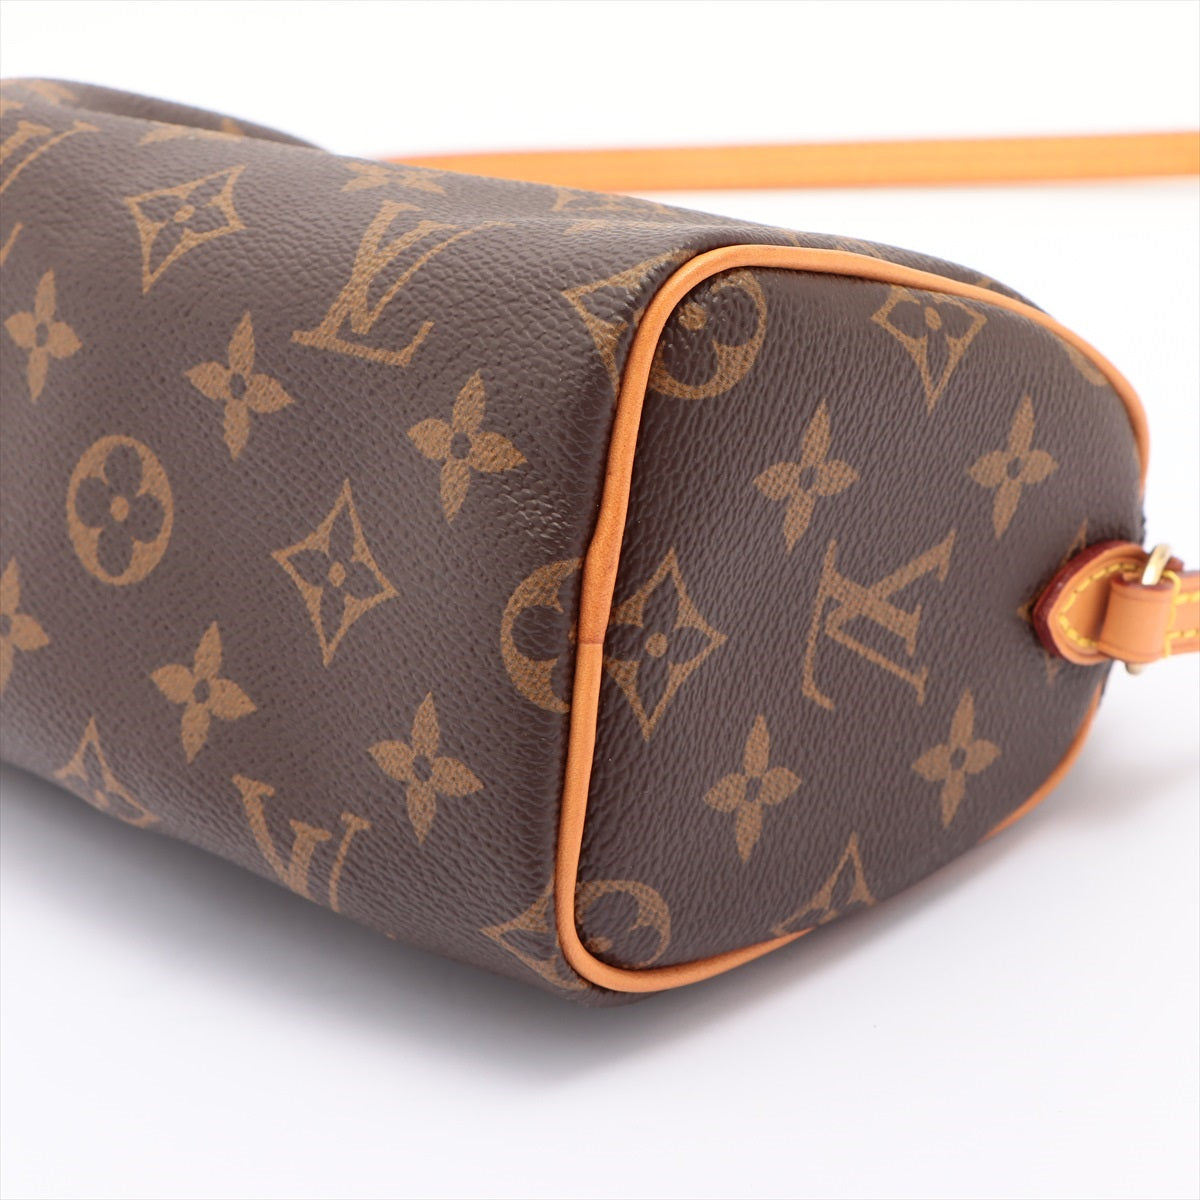 Louis Vuitton Monogram Coated Canvas Nano Noé Gold Hardware, 2020 Available  For Immediate Sale At Sotheby's